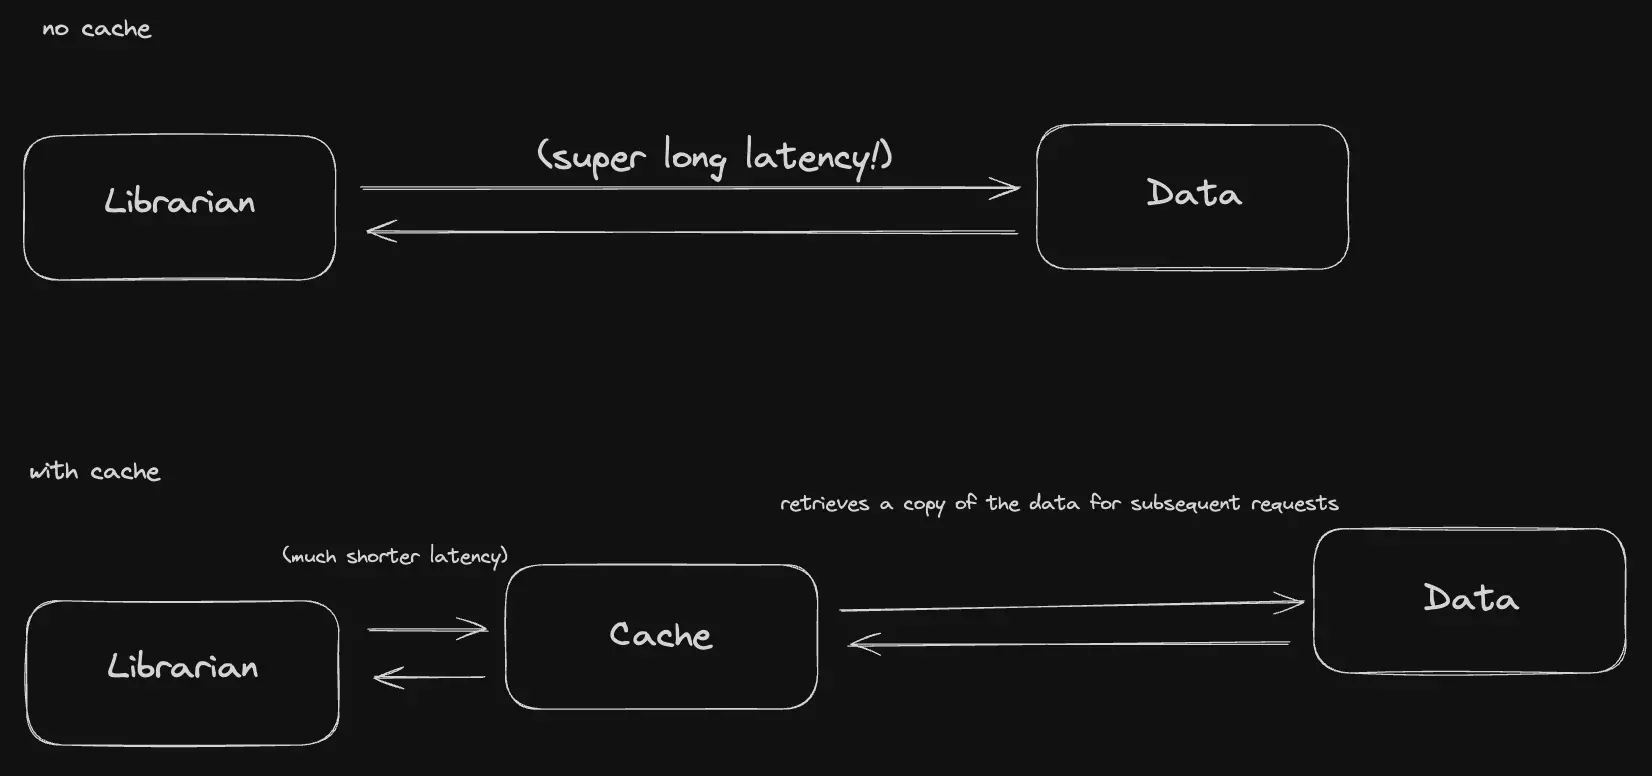 A visual explanation of caching